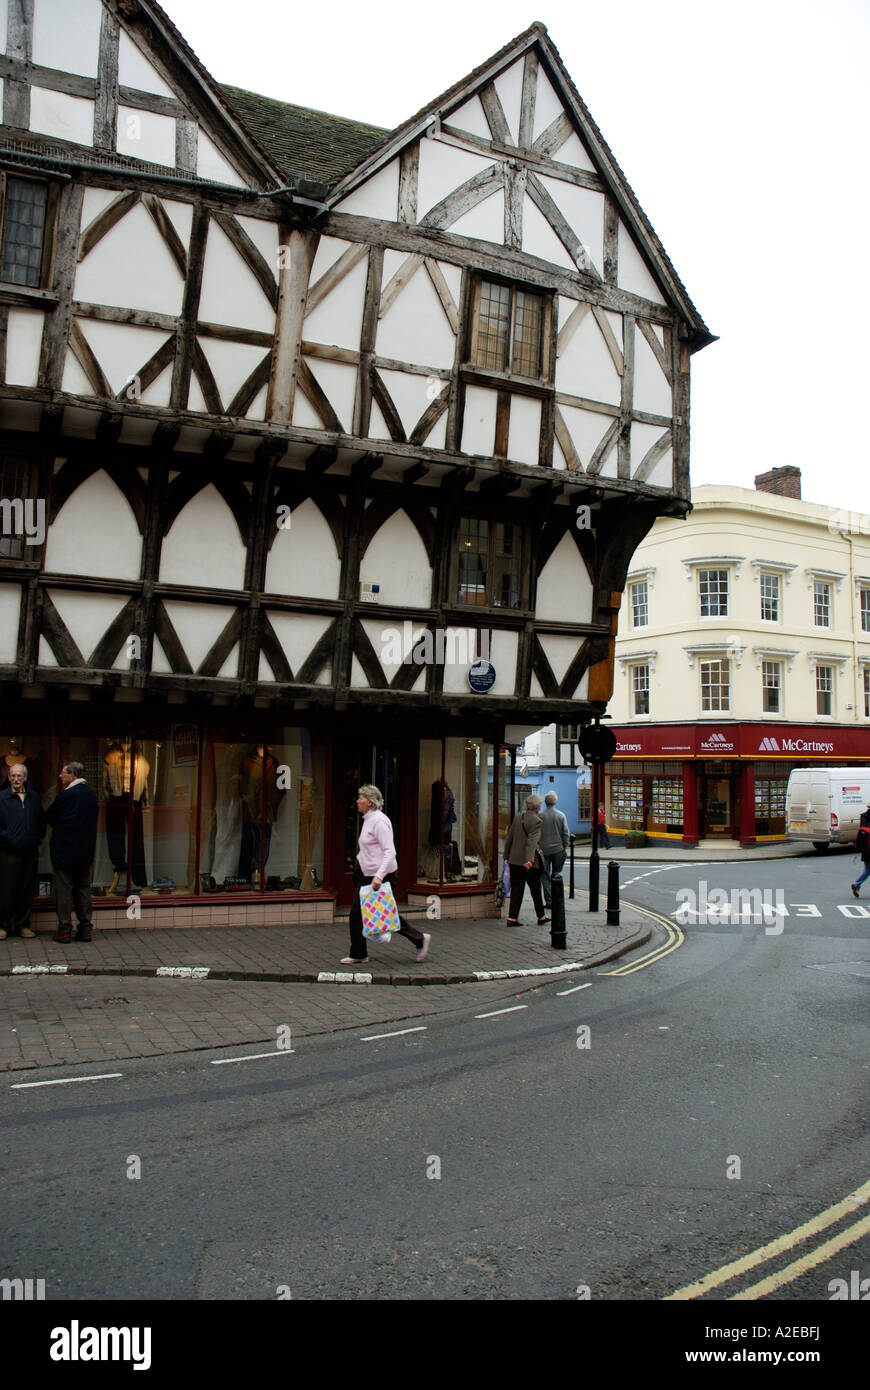 'Black and White' building in the town of Ludlow, Shropshire. Stock Photo